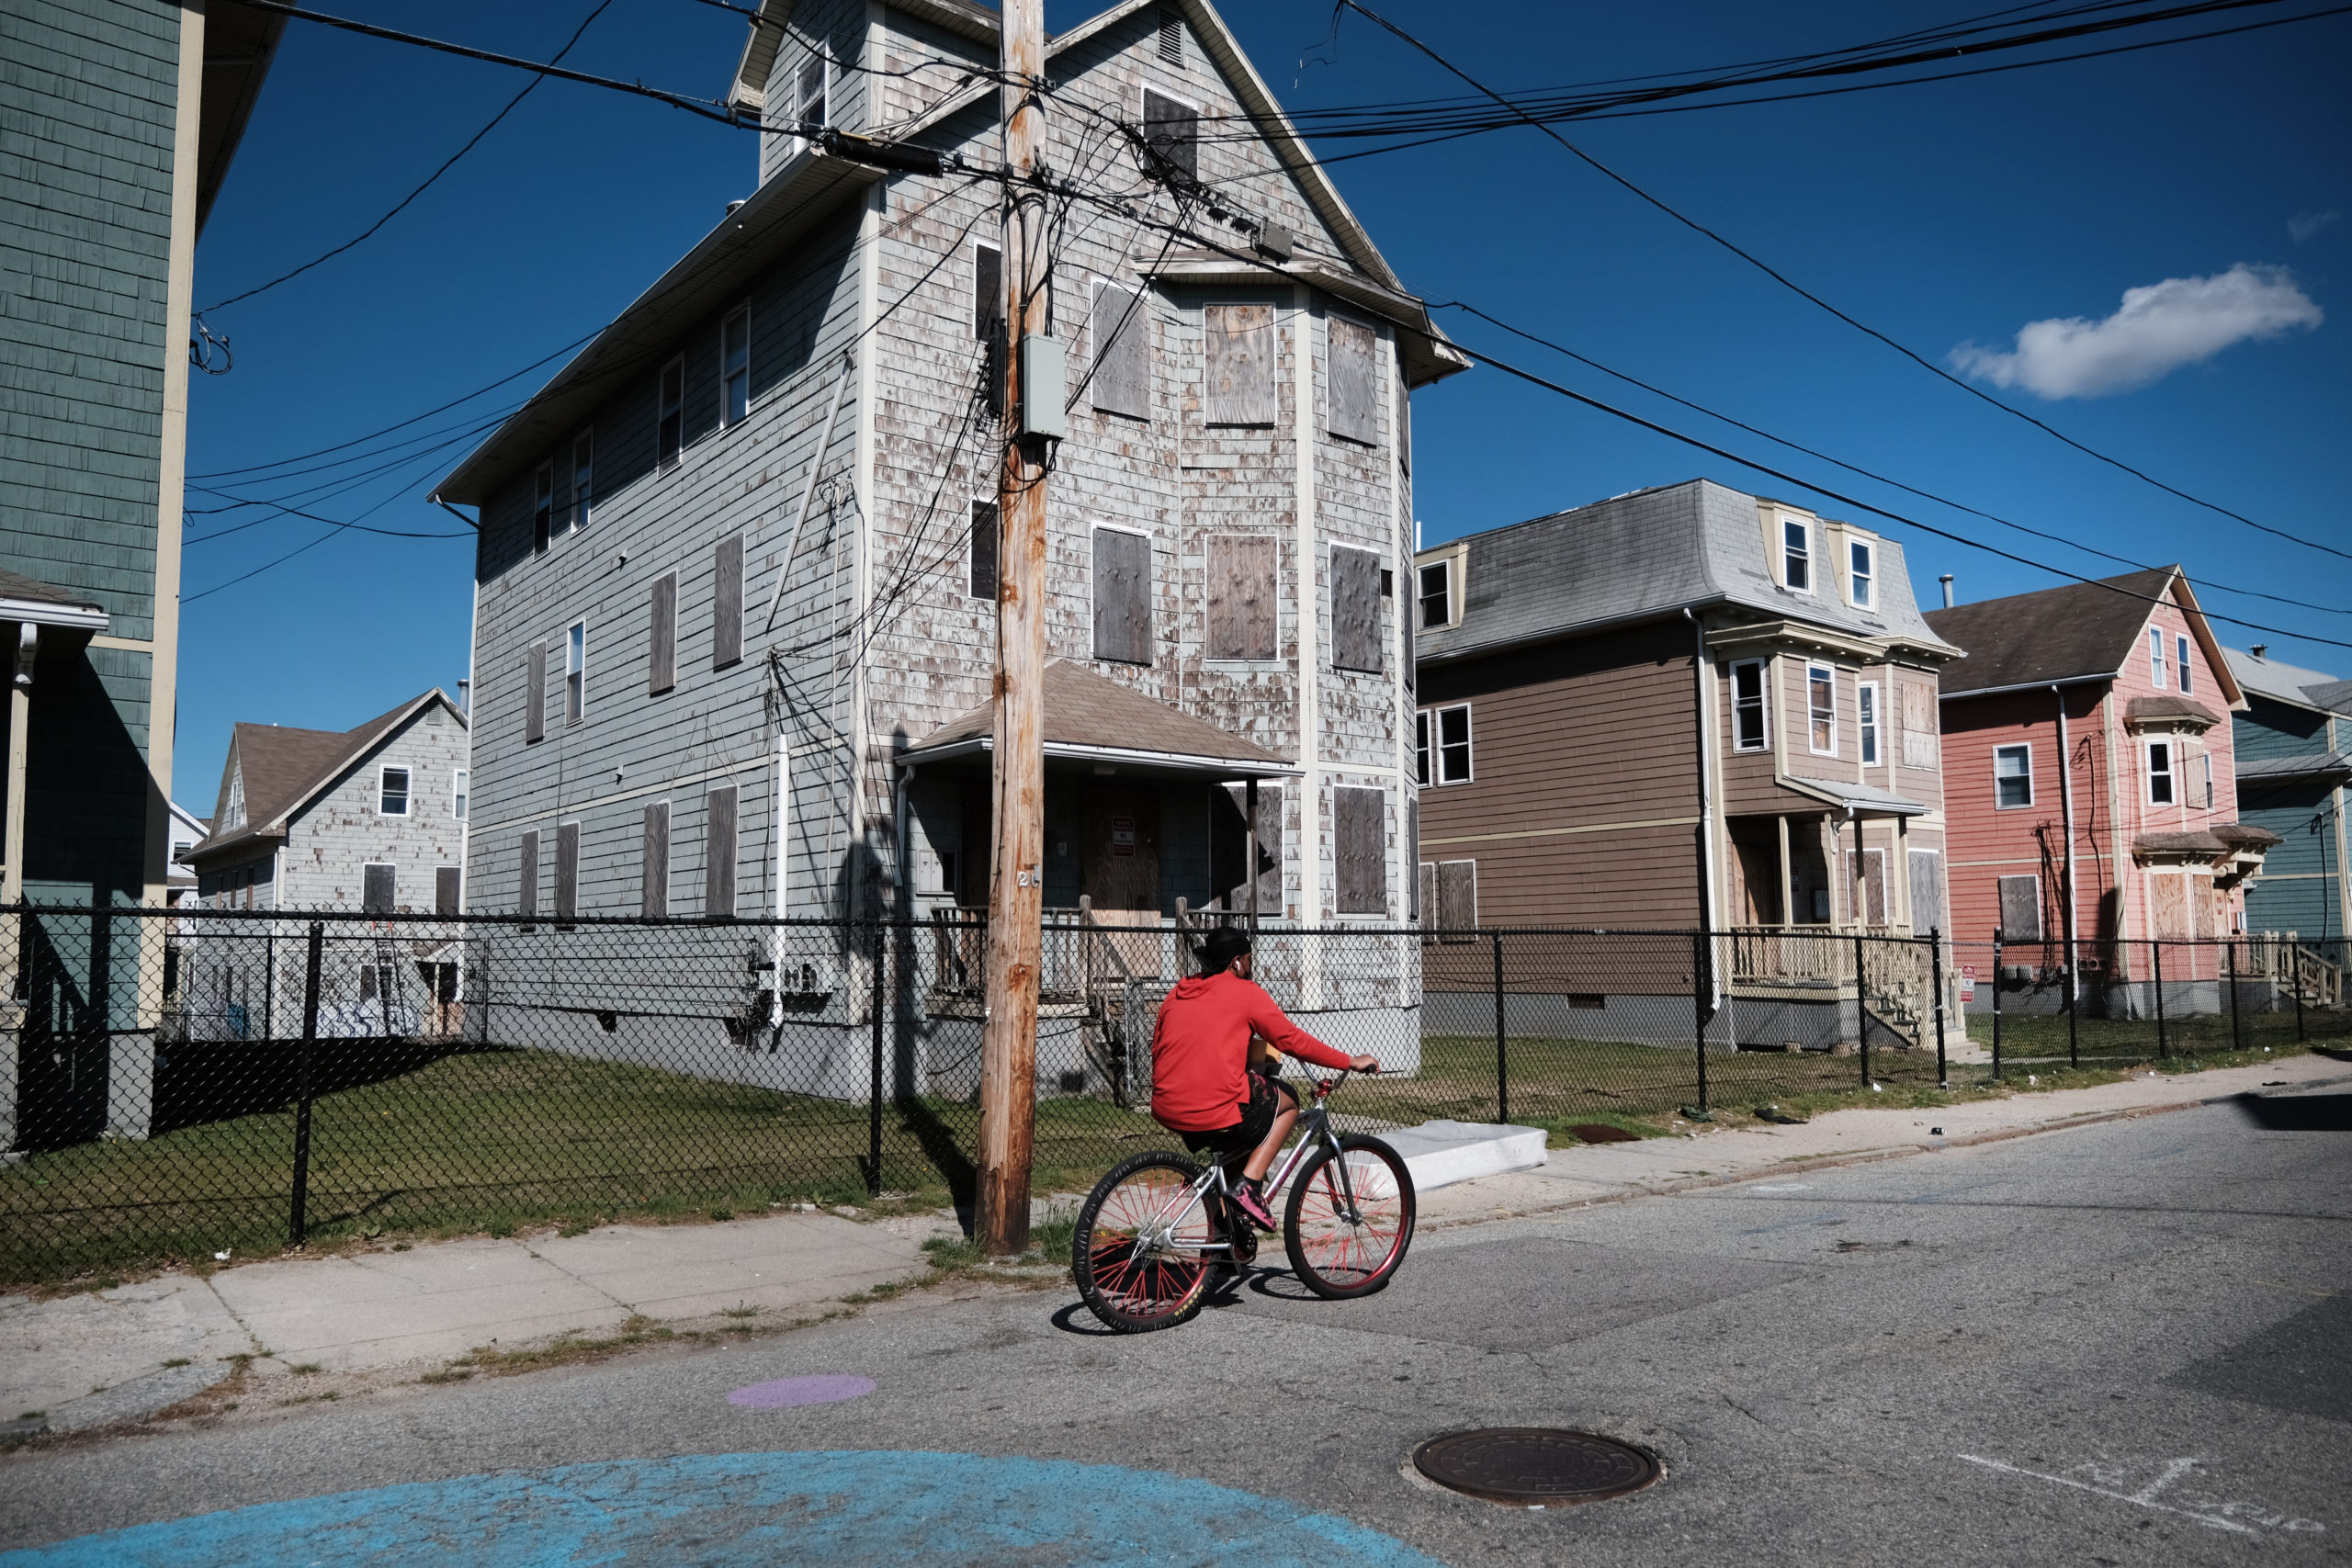 PROVIDENCE, RHODE ISLAND-APRIL 08: Homes are shown boarded up on April 08, 2021 in Providence, Rhode Island. Rhode Island in 2019 ranked worst among the 50 states in the condition of its infrastructure, and consistently ranks among the bottom, with an estimated 24 percent of its roads in poor condition and 23 percent of its bridges standing structurally deficient. Looking to reshape the U.S. economy, President Joe Biden unveiled a $2-trillion jobs, infrastructure and green energy plan called the American Jobs Plan. The administration says the proposal would create tens of thousands of jobs in construction, clean energy and technology. Many economists, engineers and politicians believe that infrastructure in the U.S. lags behind China and other leading nations. (Photo by Spencer Platt/Getty Images)